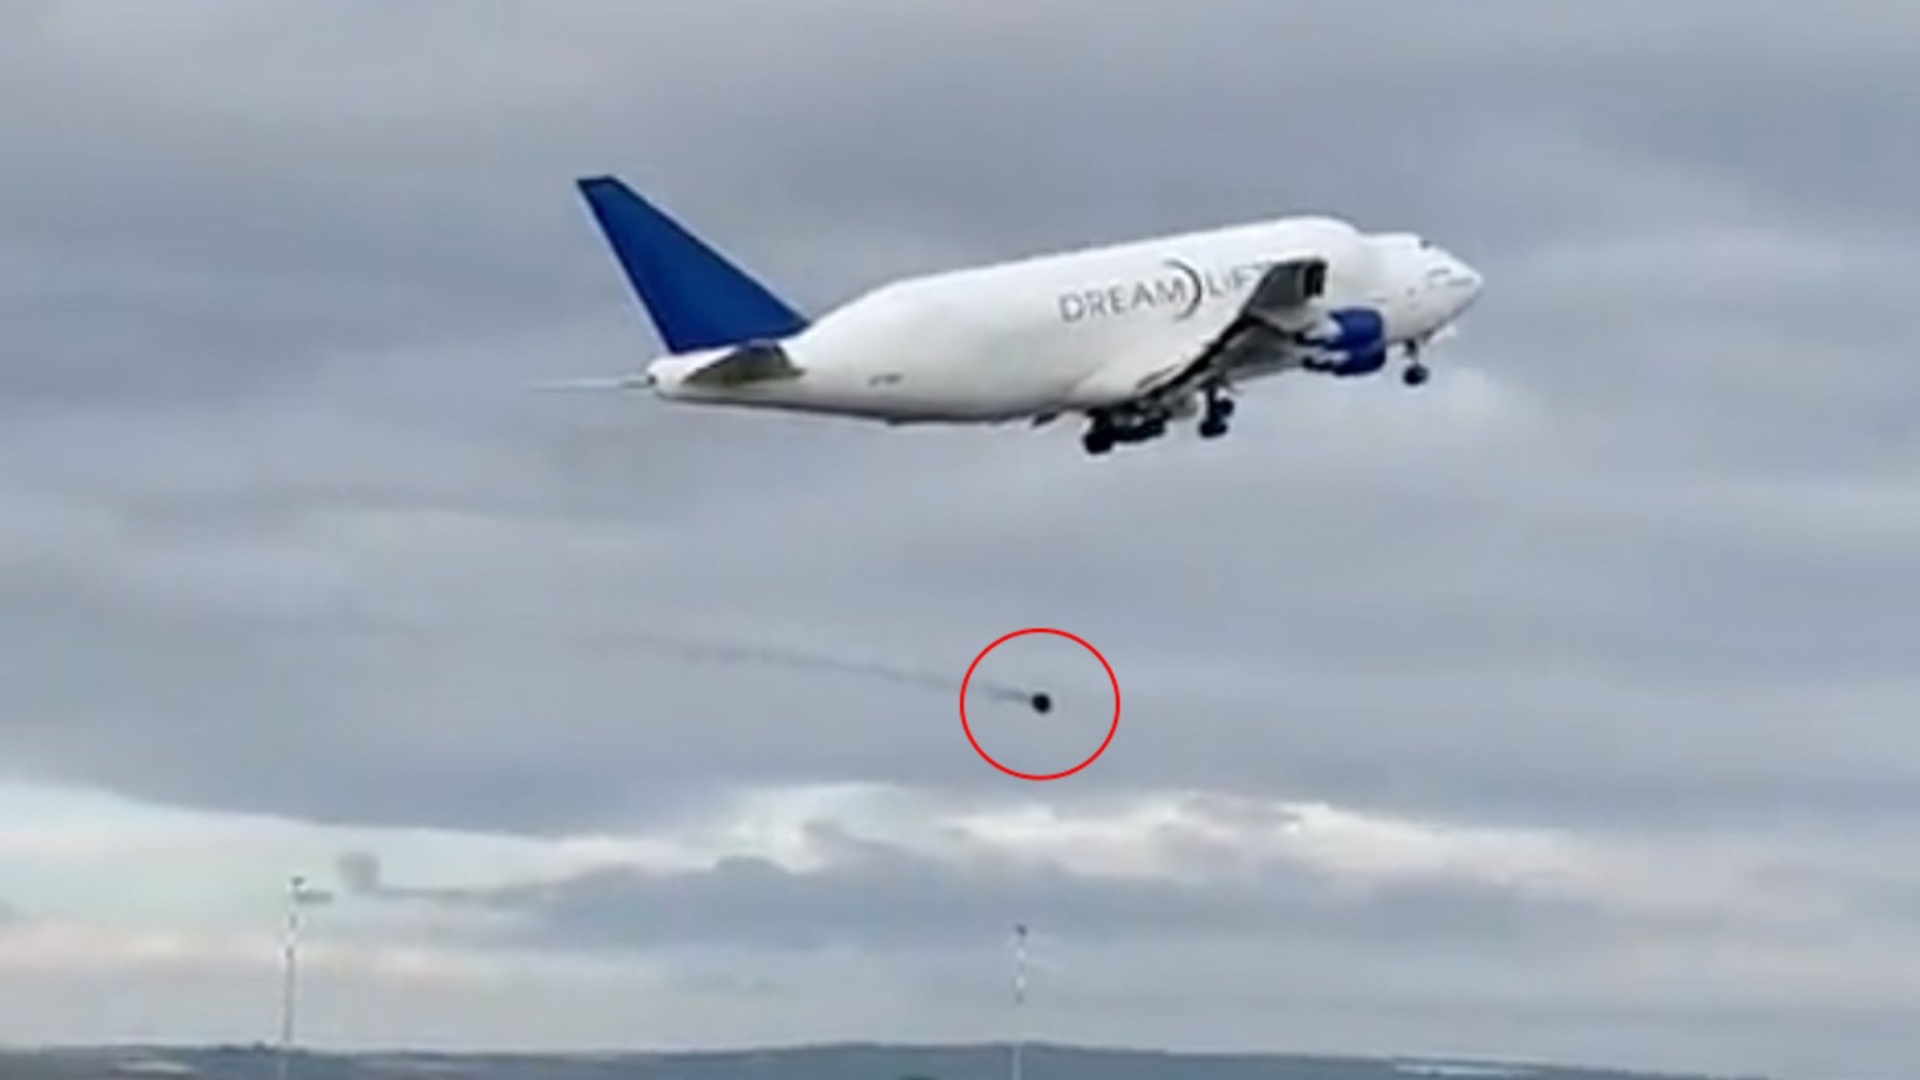 Incredible moment: Boeing 747’s smoking part hurls towards runway after takeoff.